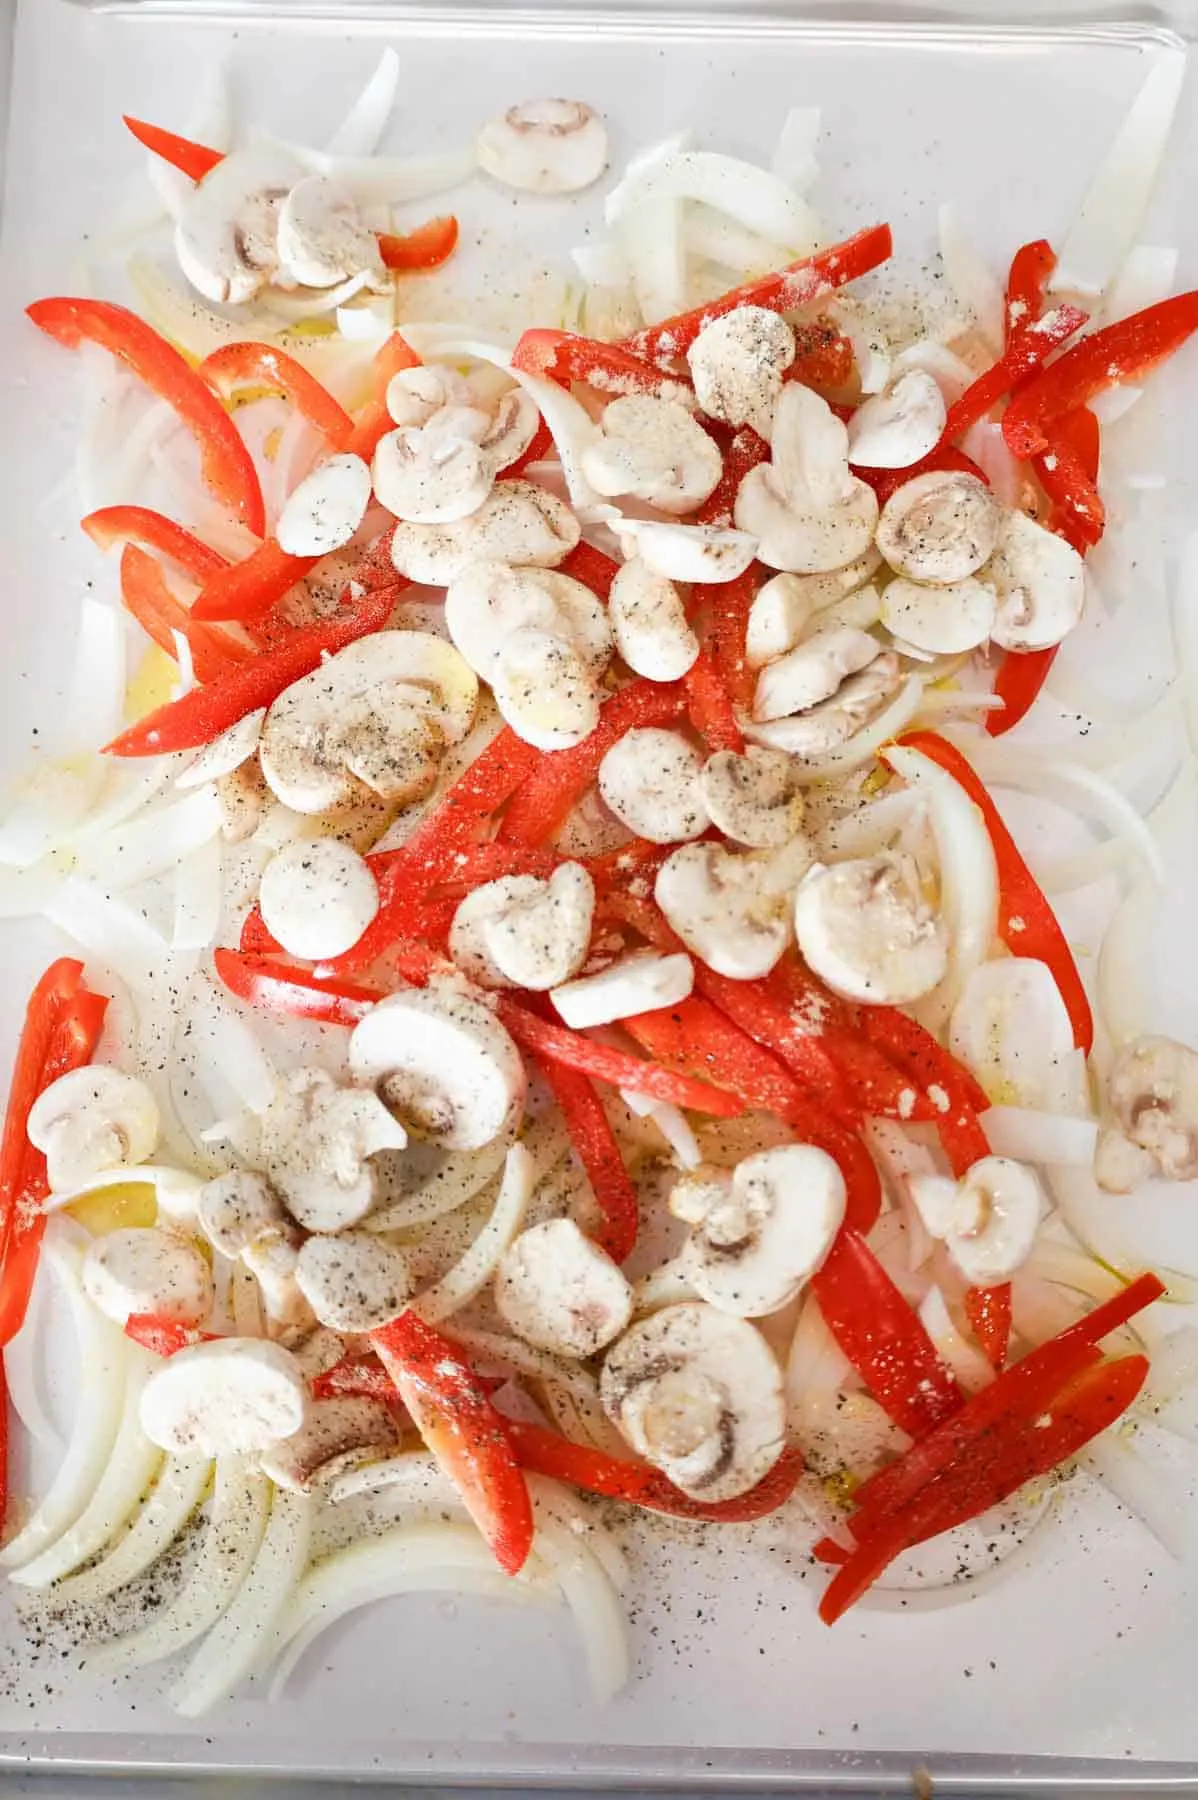 seasoning and olive oil on top of sliced onions, mushrooms and red bell peppers on a parchment lined sheet pan